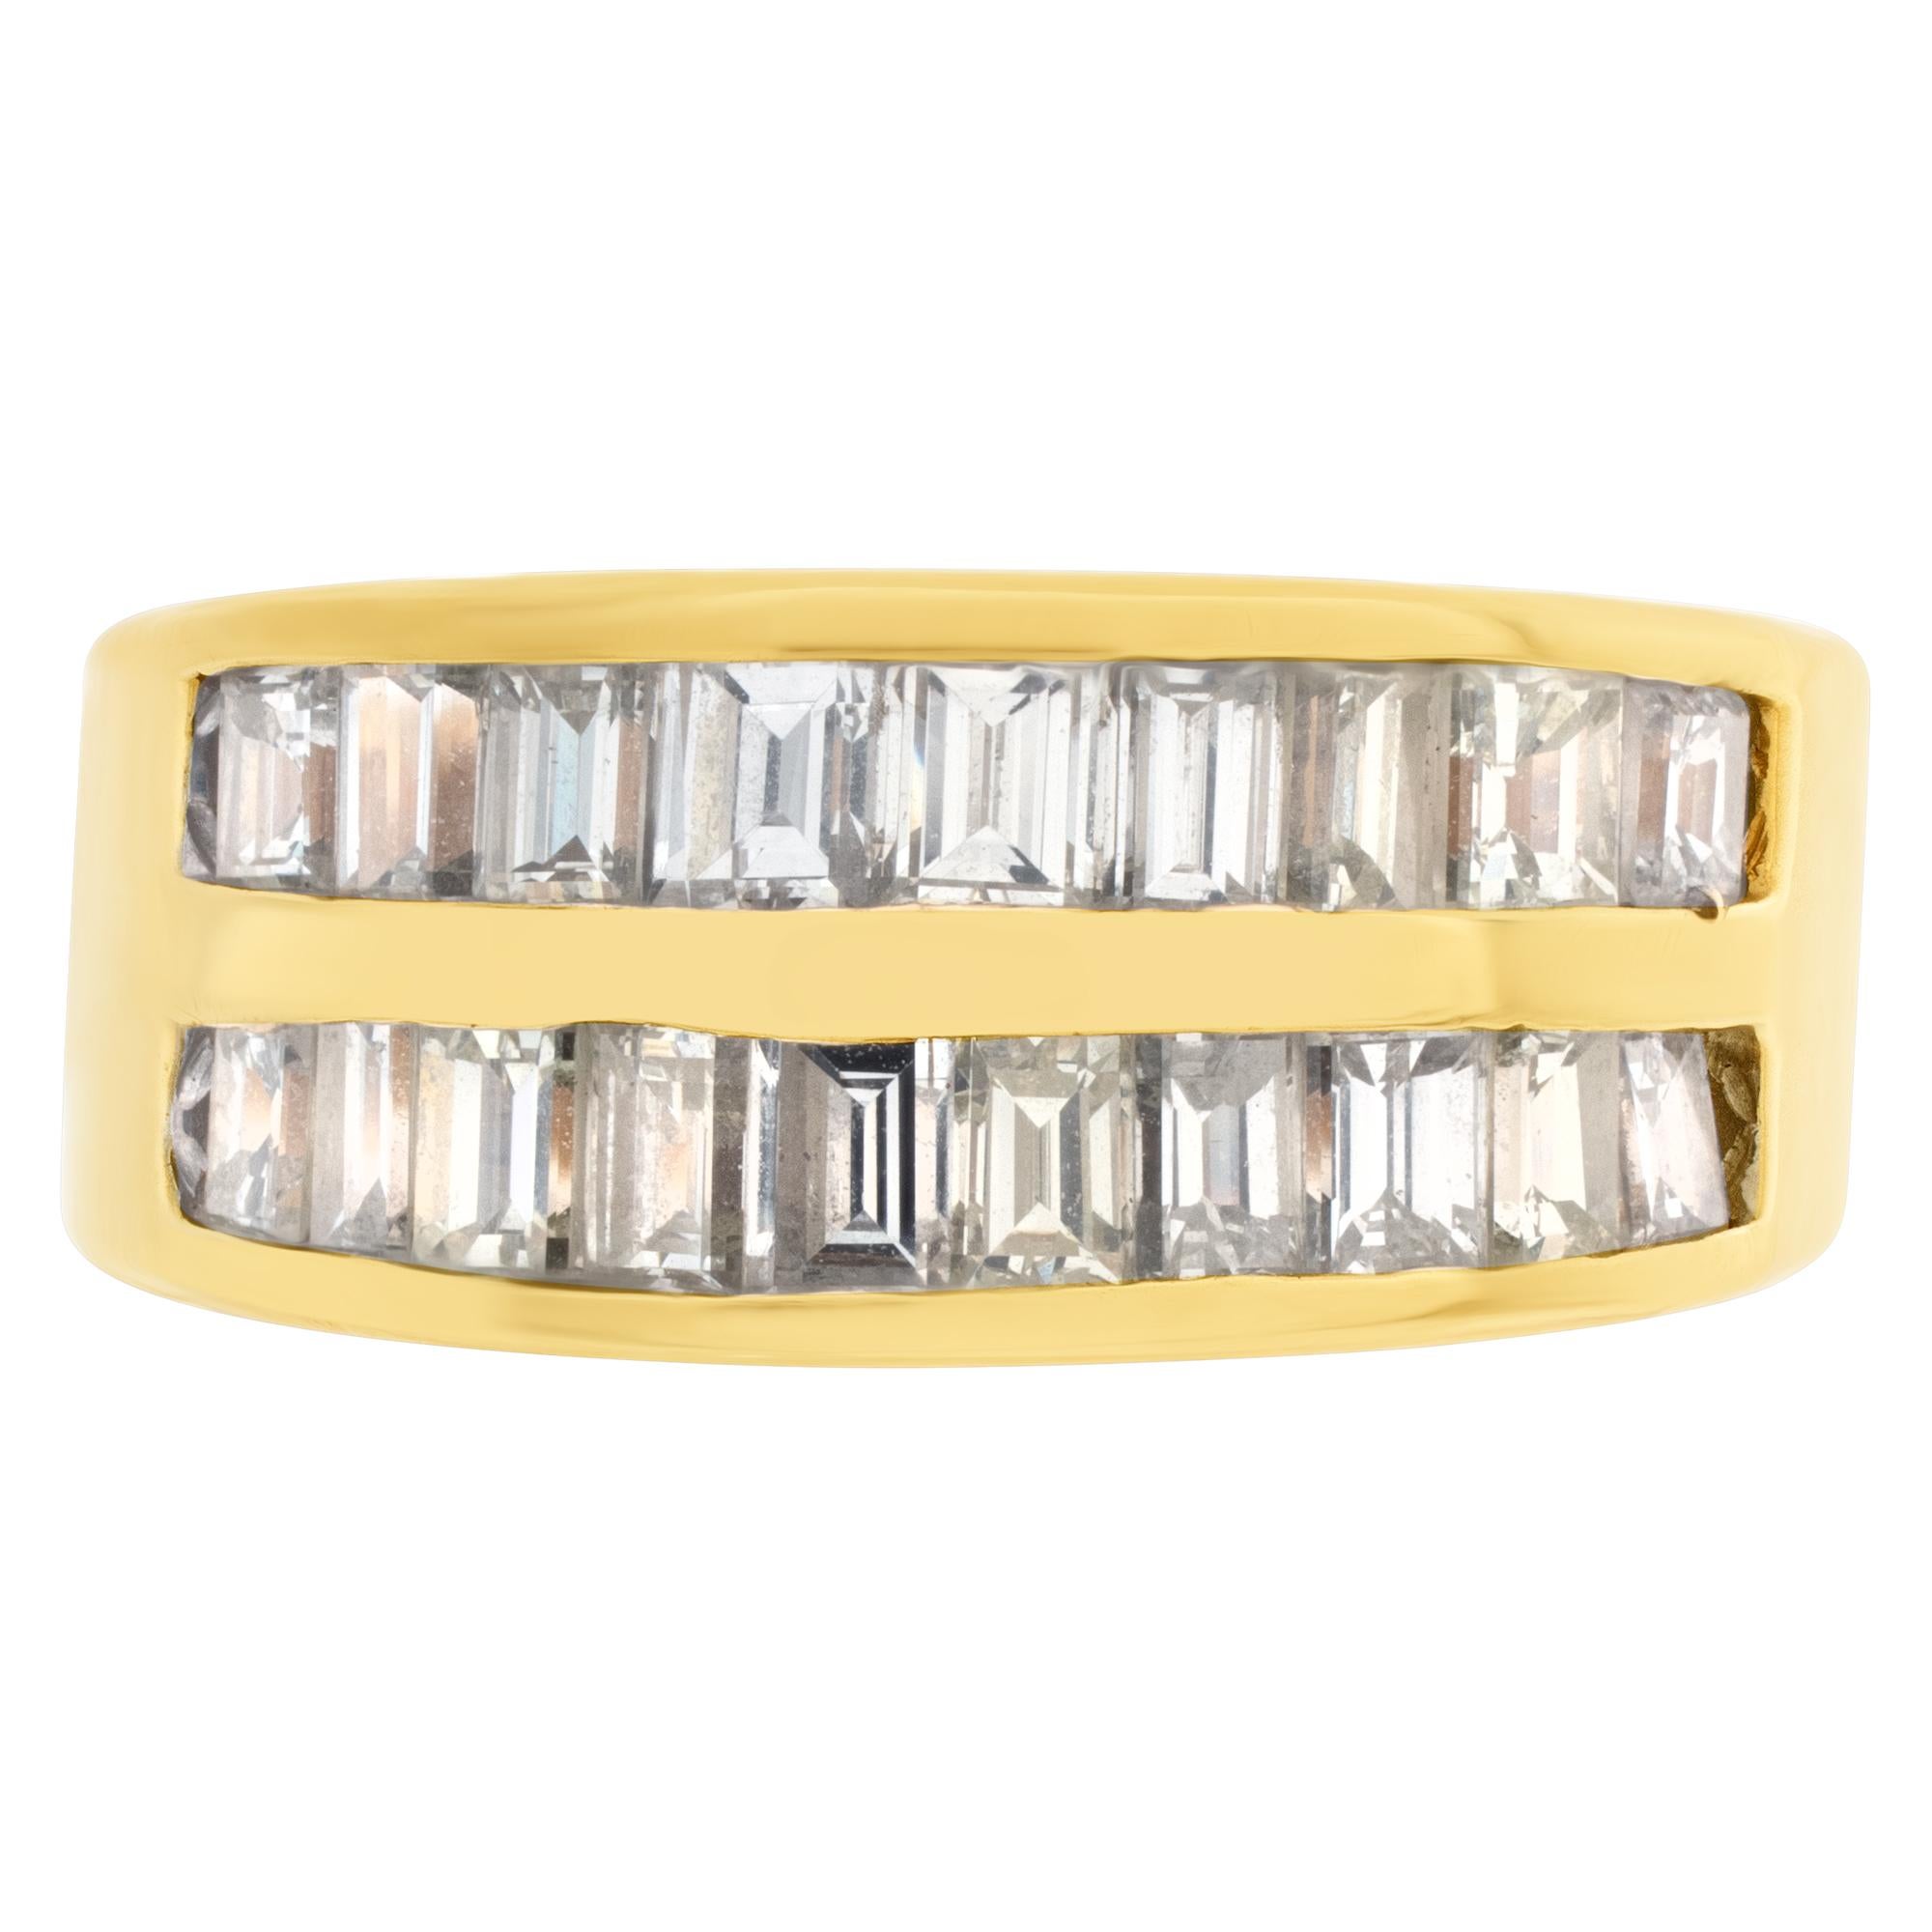 Diamond ring in 14k yellow gold with 2 rows of baguette diamonds approximately 2 carats total. G color VS clarity. Size 5 1/4.This Diamond ring is currently size 5.25 and some items can be sized up or down, please ask! It weighs 3.7 pennyweights and